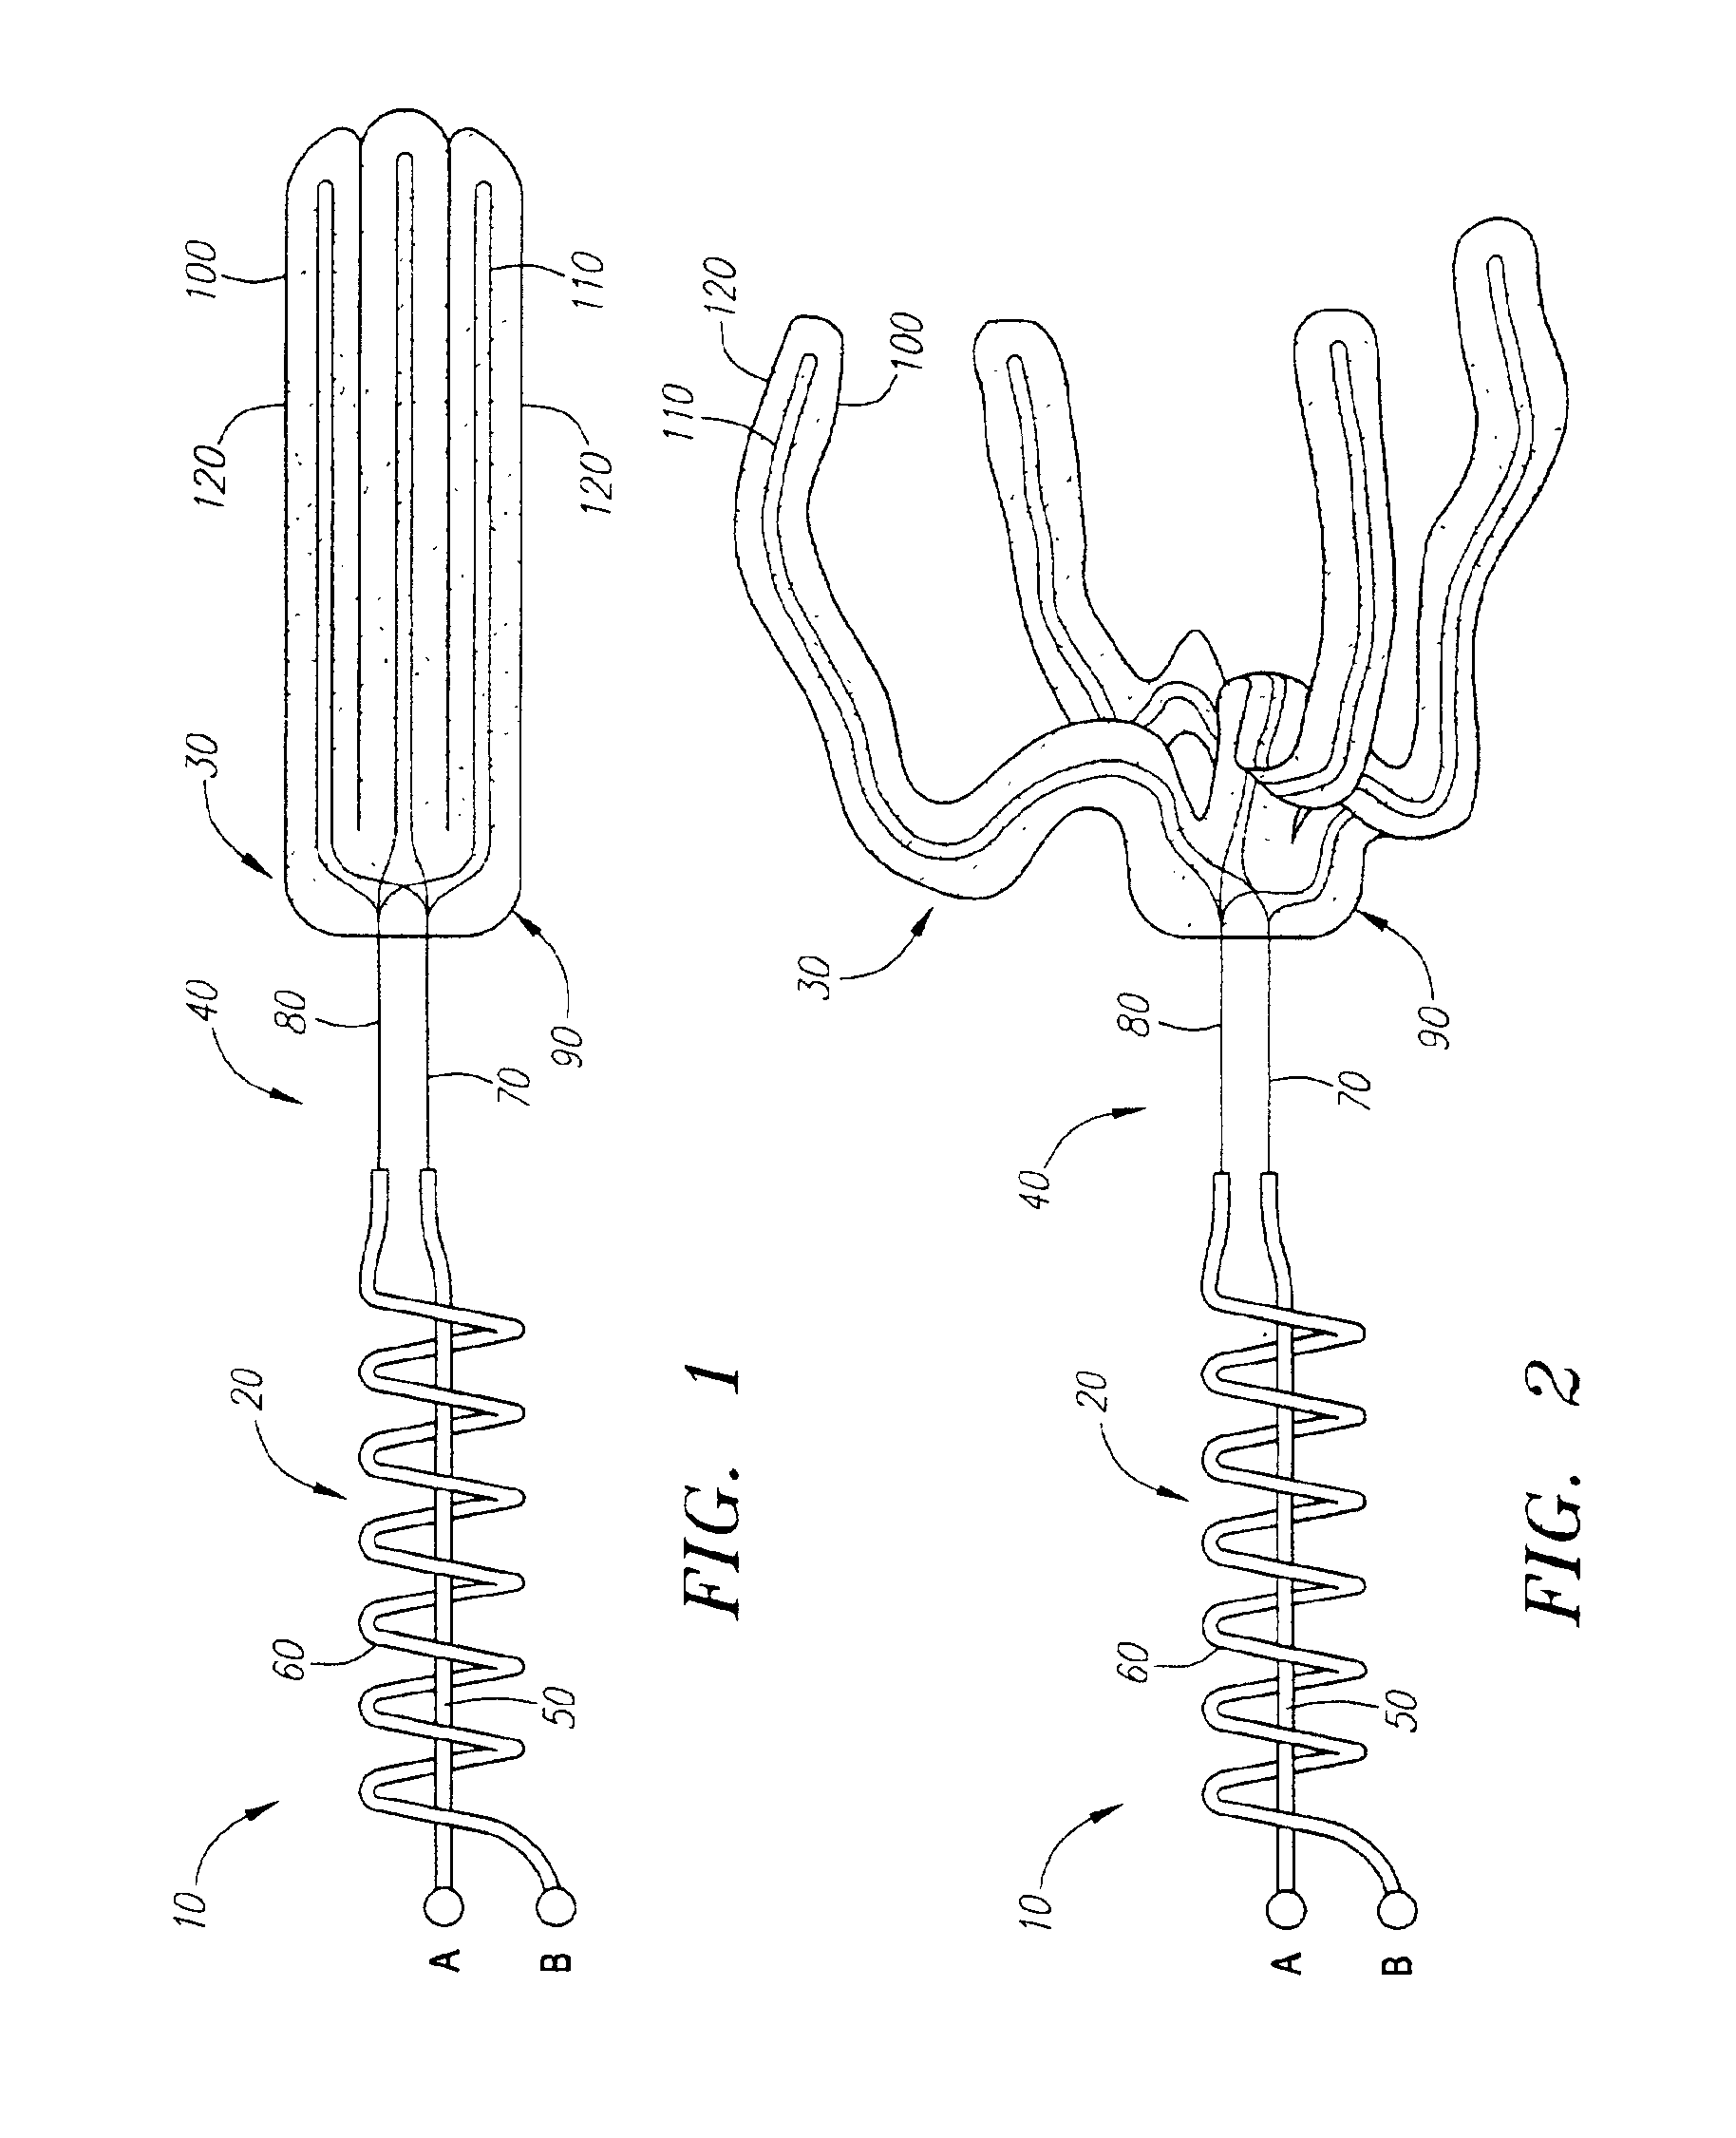 Detachable device with electrically responsive element